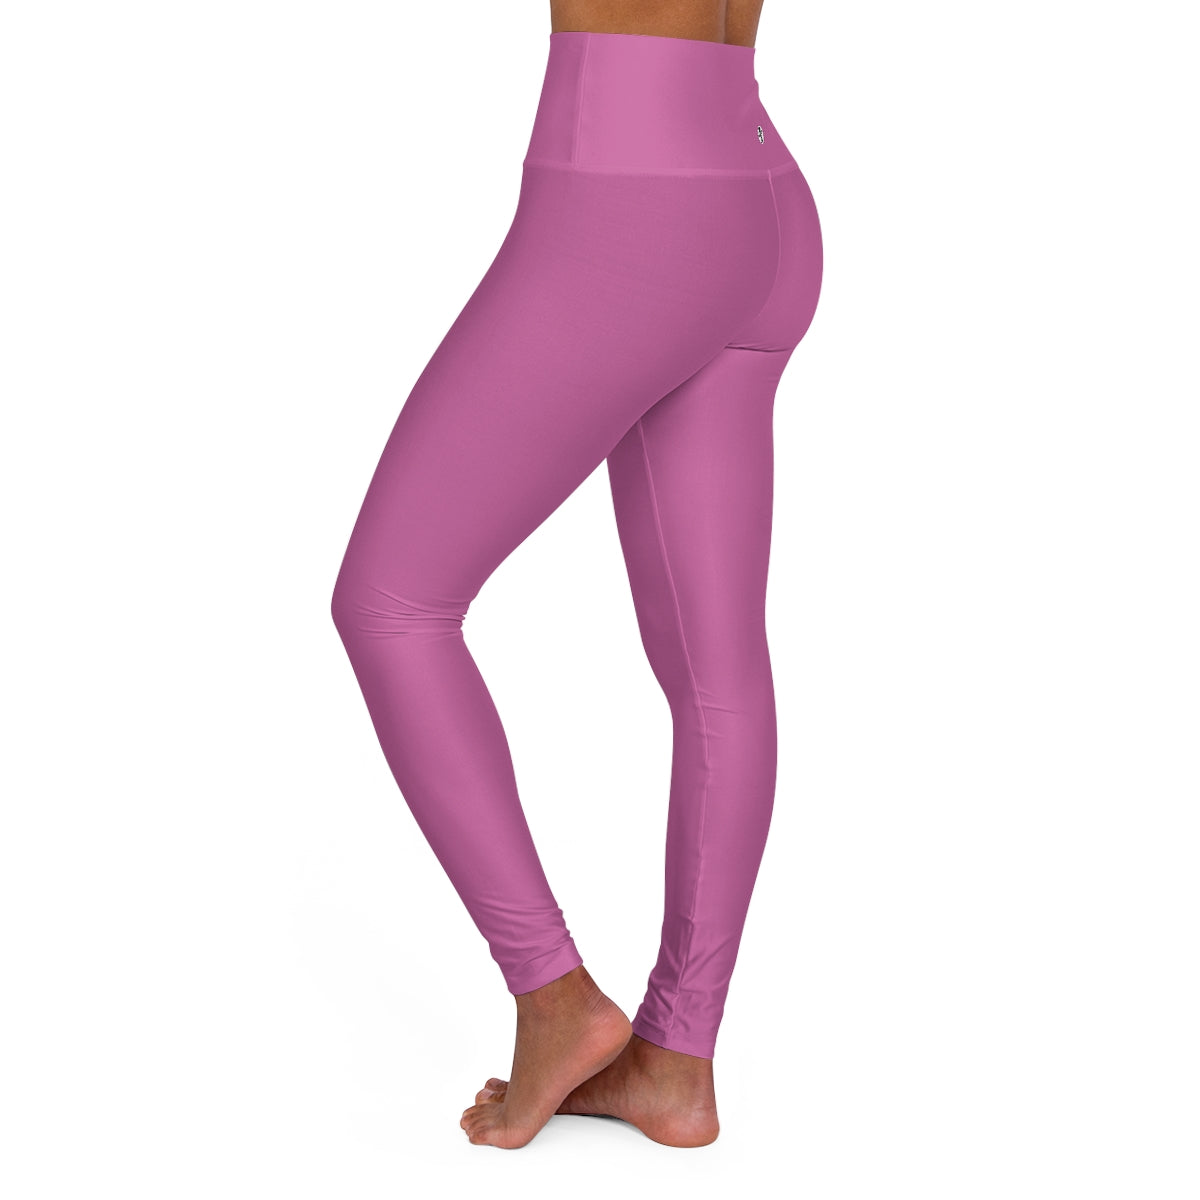  JBIVWW High Waist Yoga Pants Leggings for Fitness Stretchy  Sport Leggings Sports Pants Push Up Women Fitness Gym Leggings (Color : Light  Pink, Size : Large) : Clothing, Shoes & Jewelry